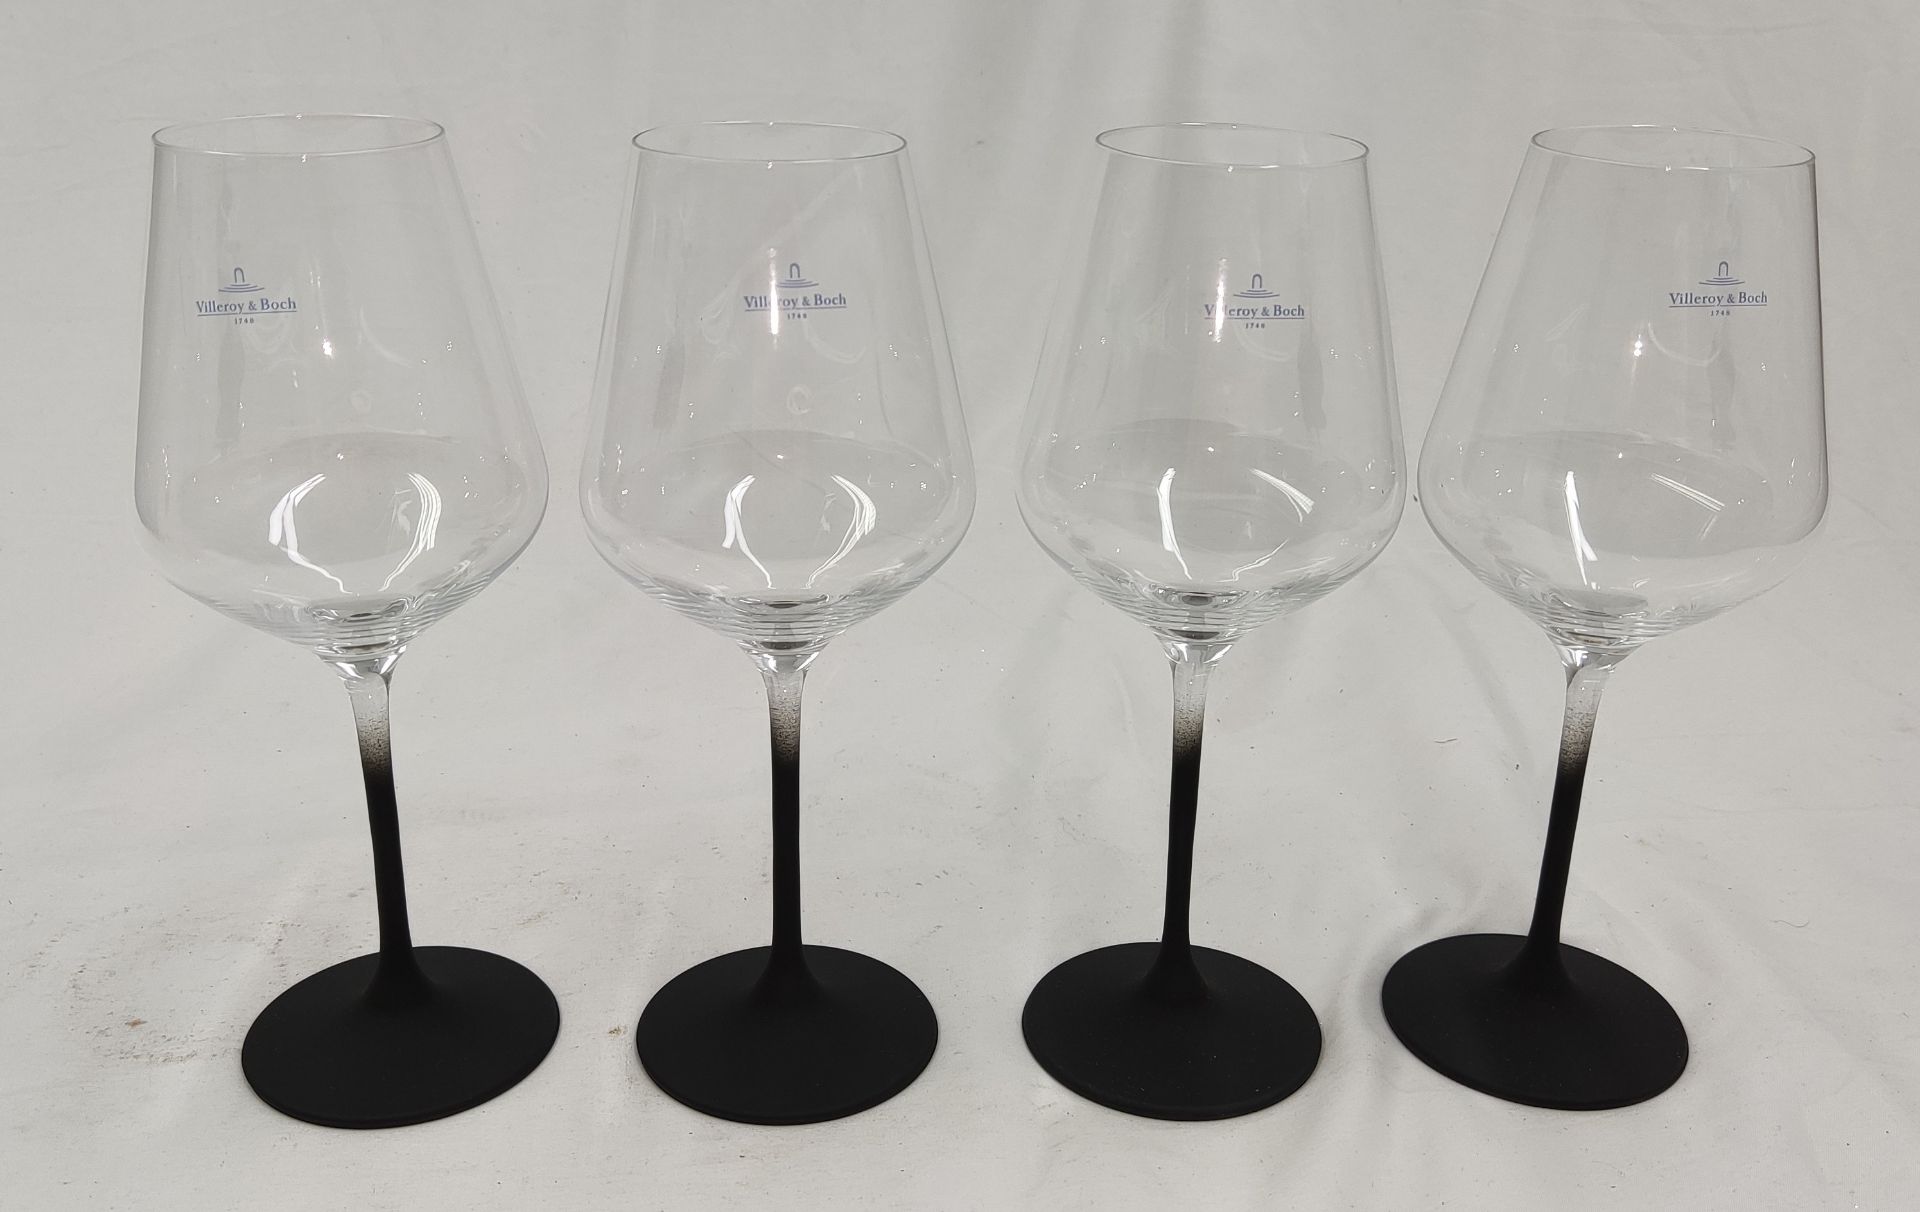 1 x VILLEROY & BOCH Manufacture Rock Red Wine Goblet Set, 4 Piece - New And Boxed - RRP £66 - Ref: - Image 9 of 12